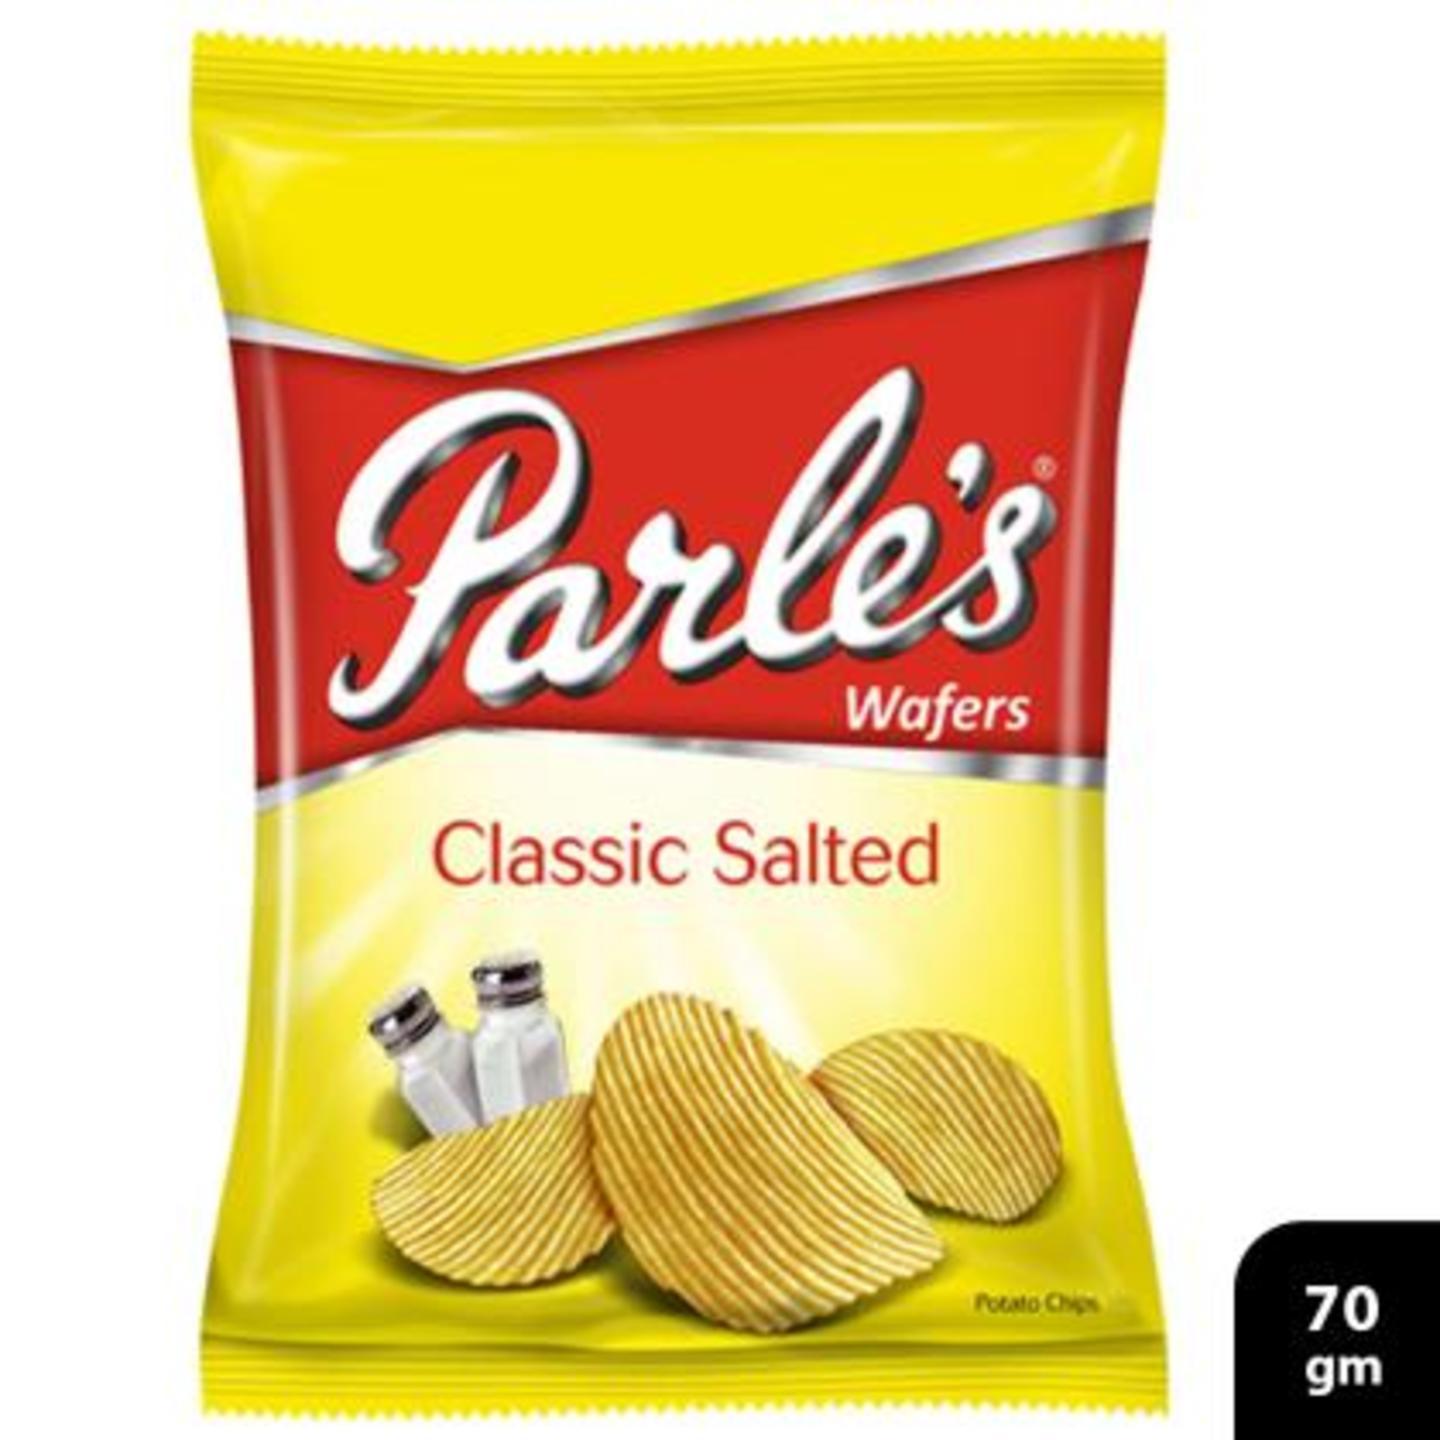 Parles Classic Salted Wafers 70 g